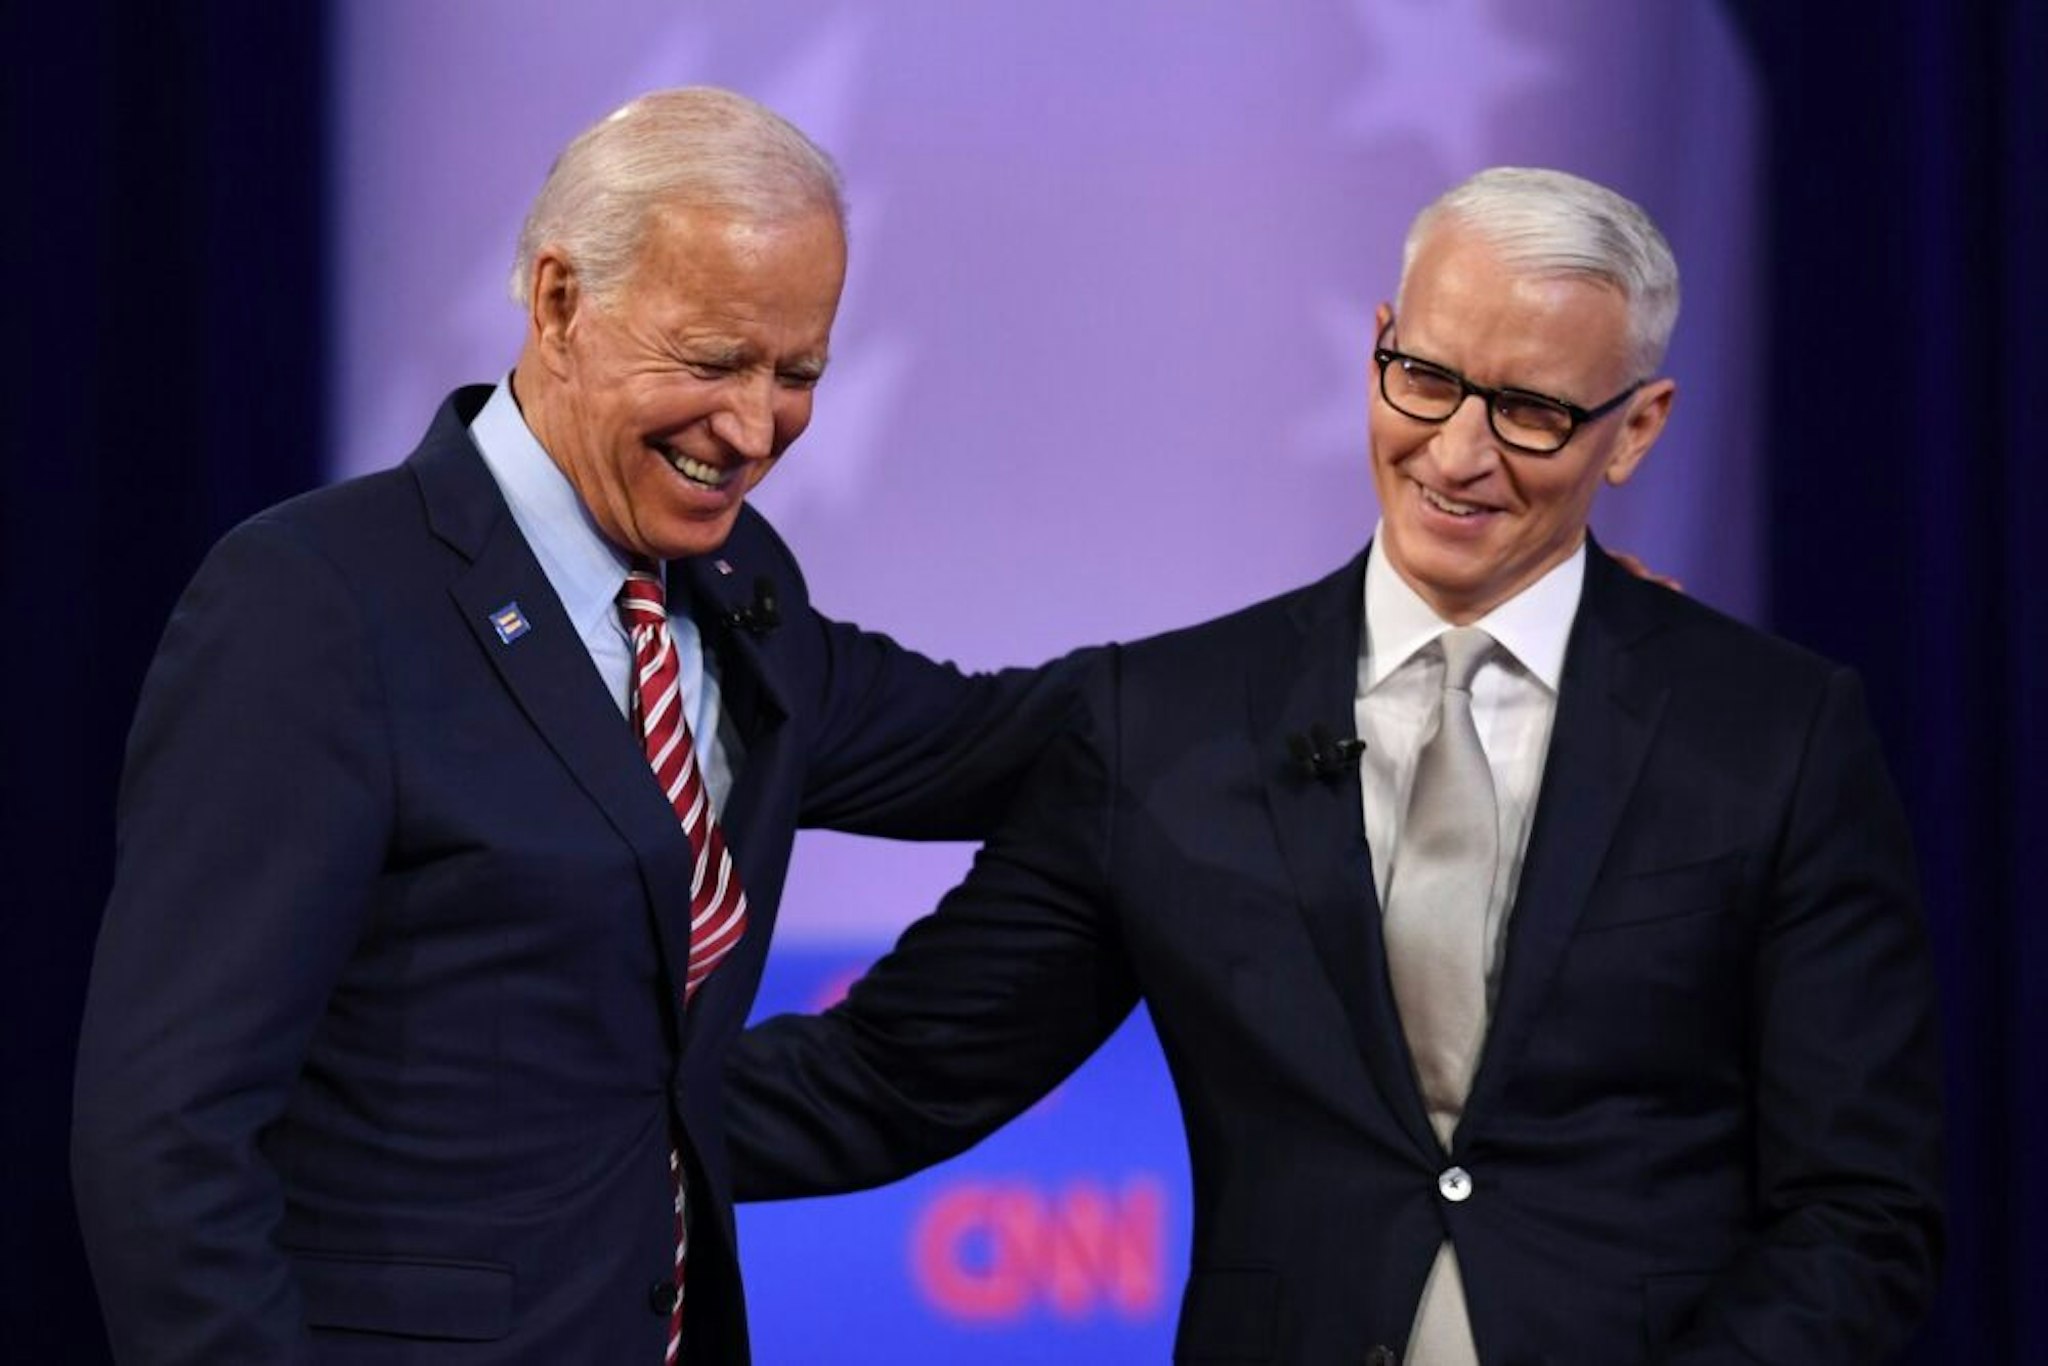 Democratic presidential hopeful former US Vice President Joe Biden (L) laughs with moderator CNN's Anderson Cooper during a town hall devoted to LGBTQ issues hosted by CNN and the Human rights Campaign Foundation at The Novo in Los Angeles on October 10, 2019.